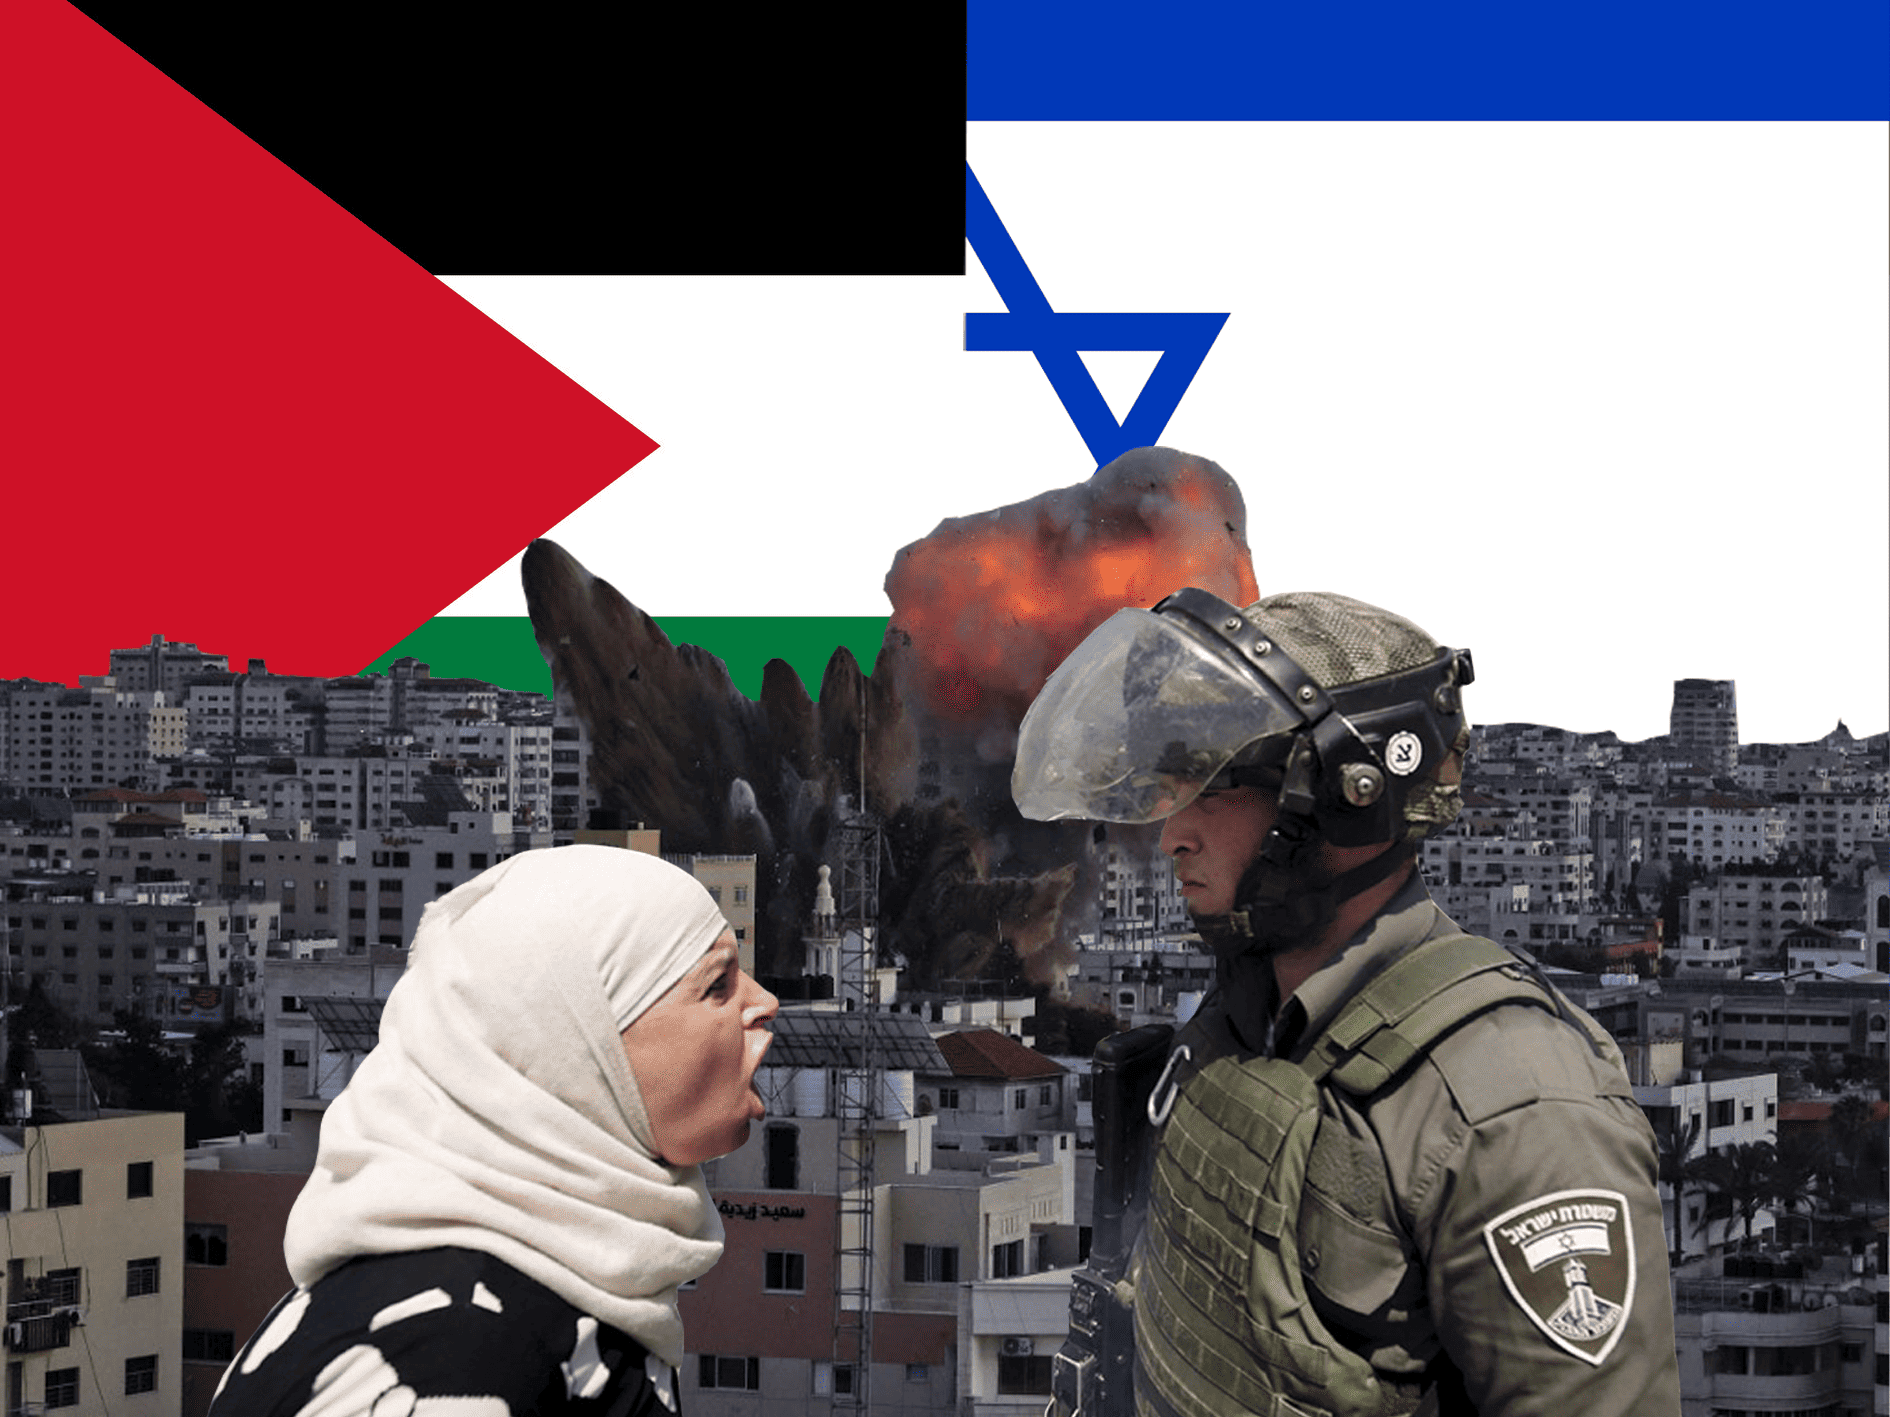 What’s Happening with the Israeli and Palestinian Conflict Right Now?